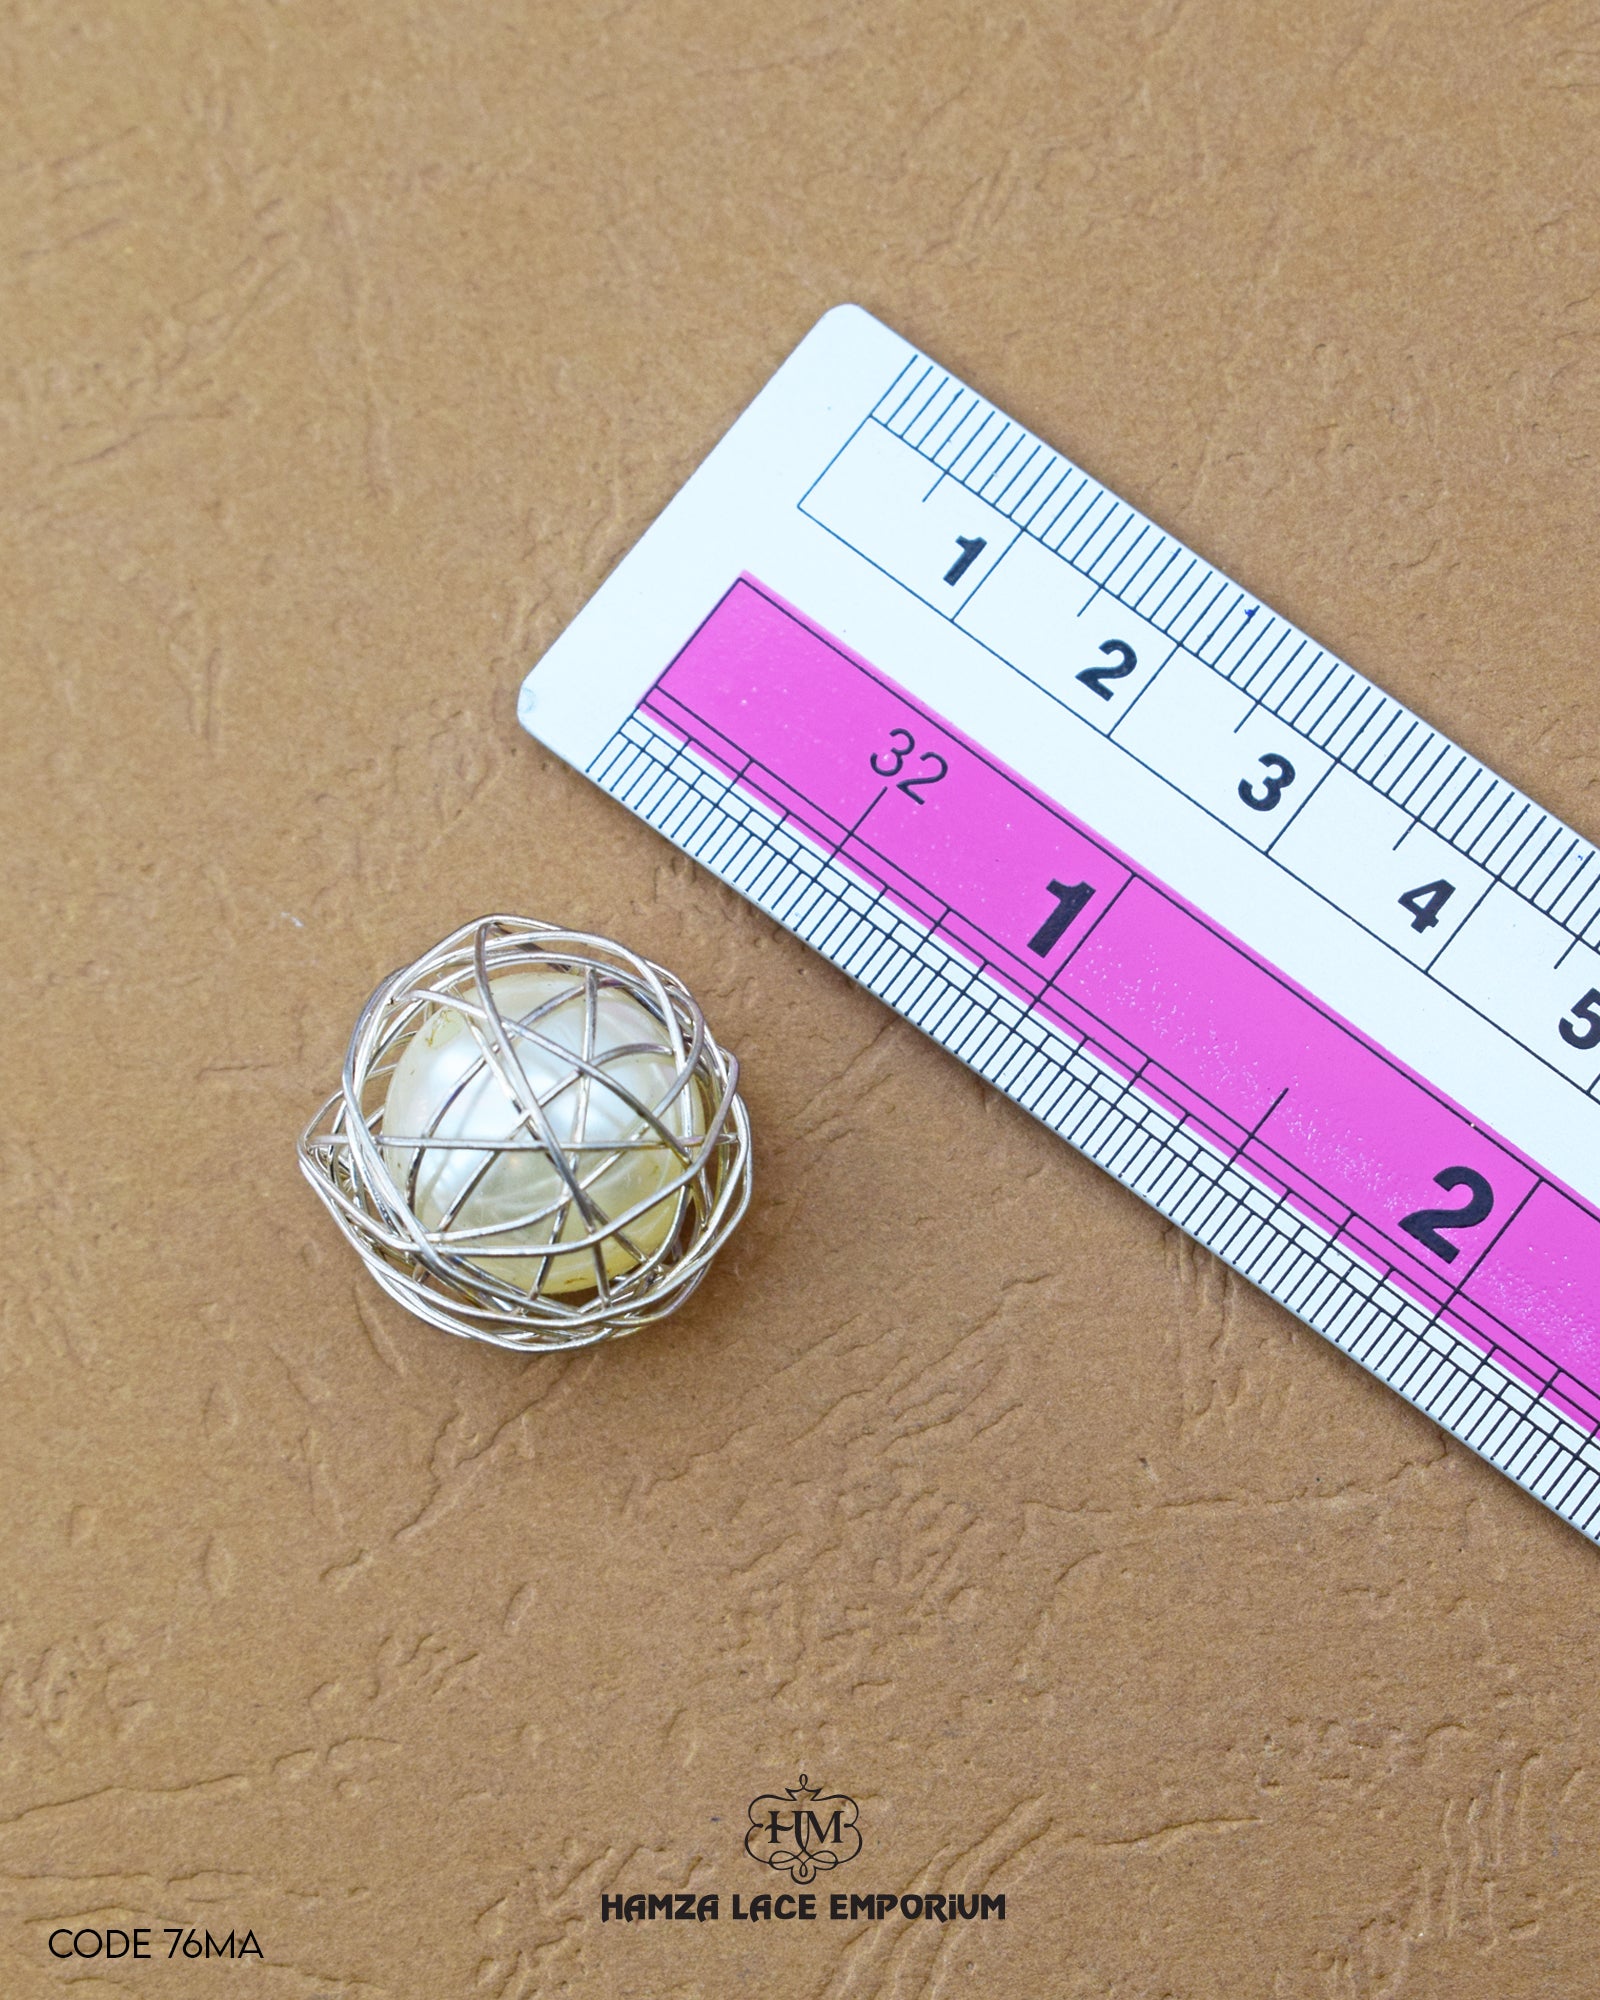 The size of the 'Metal Accessory MA76' is indicated using a ruler.